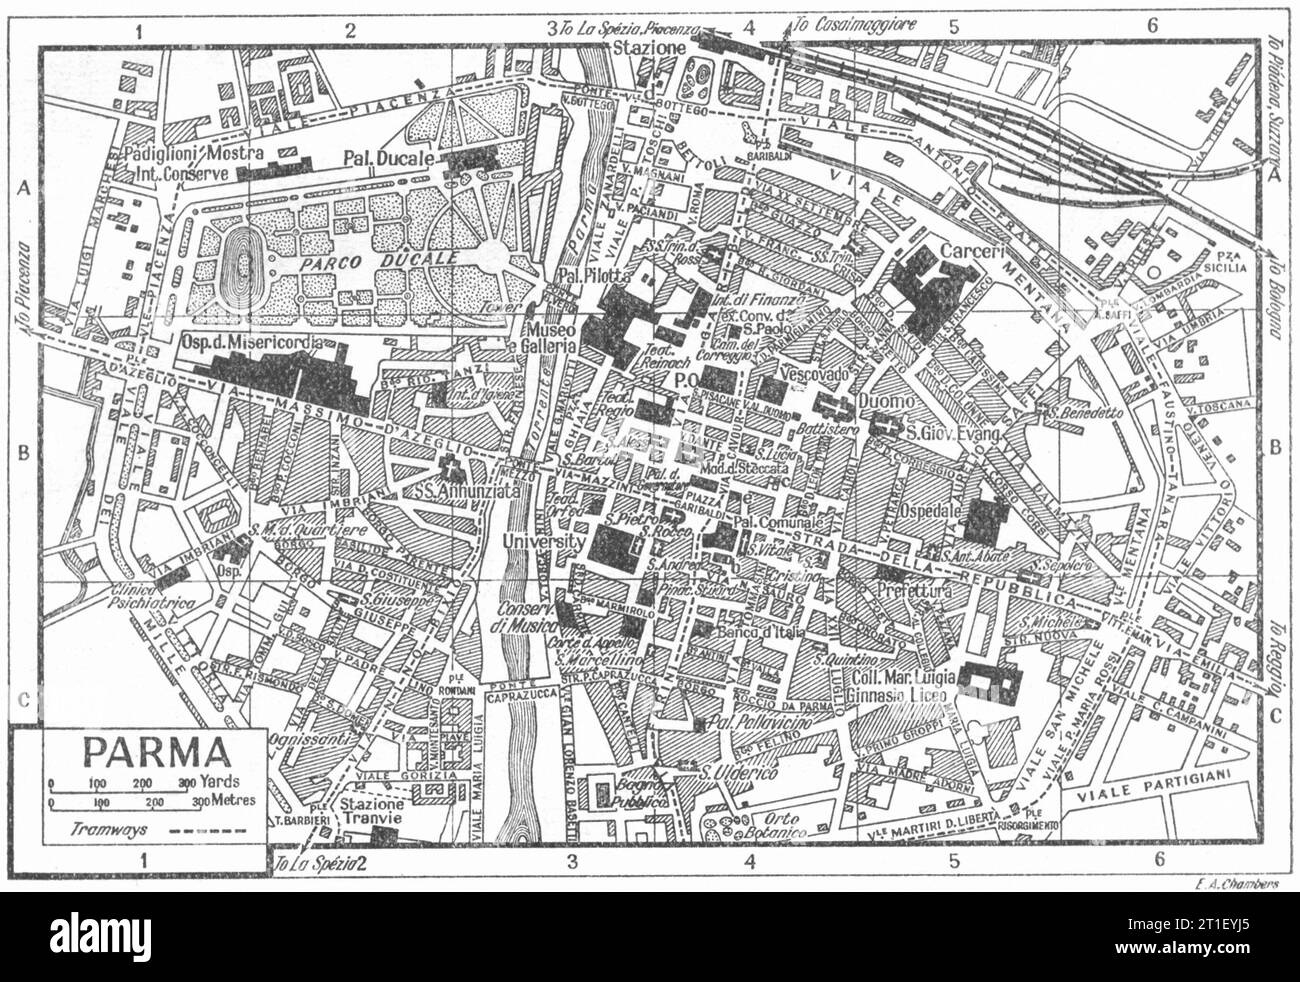 PARMA town/city plan. Italy 1953 old vintage map chart Stock Photo